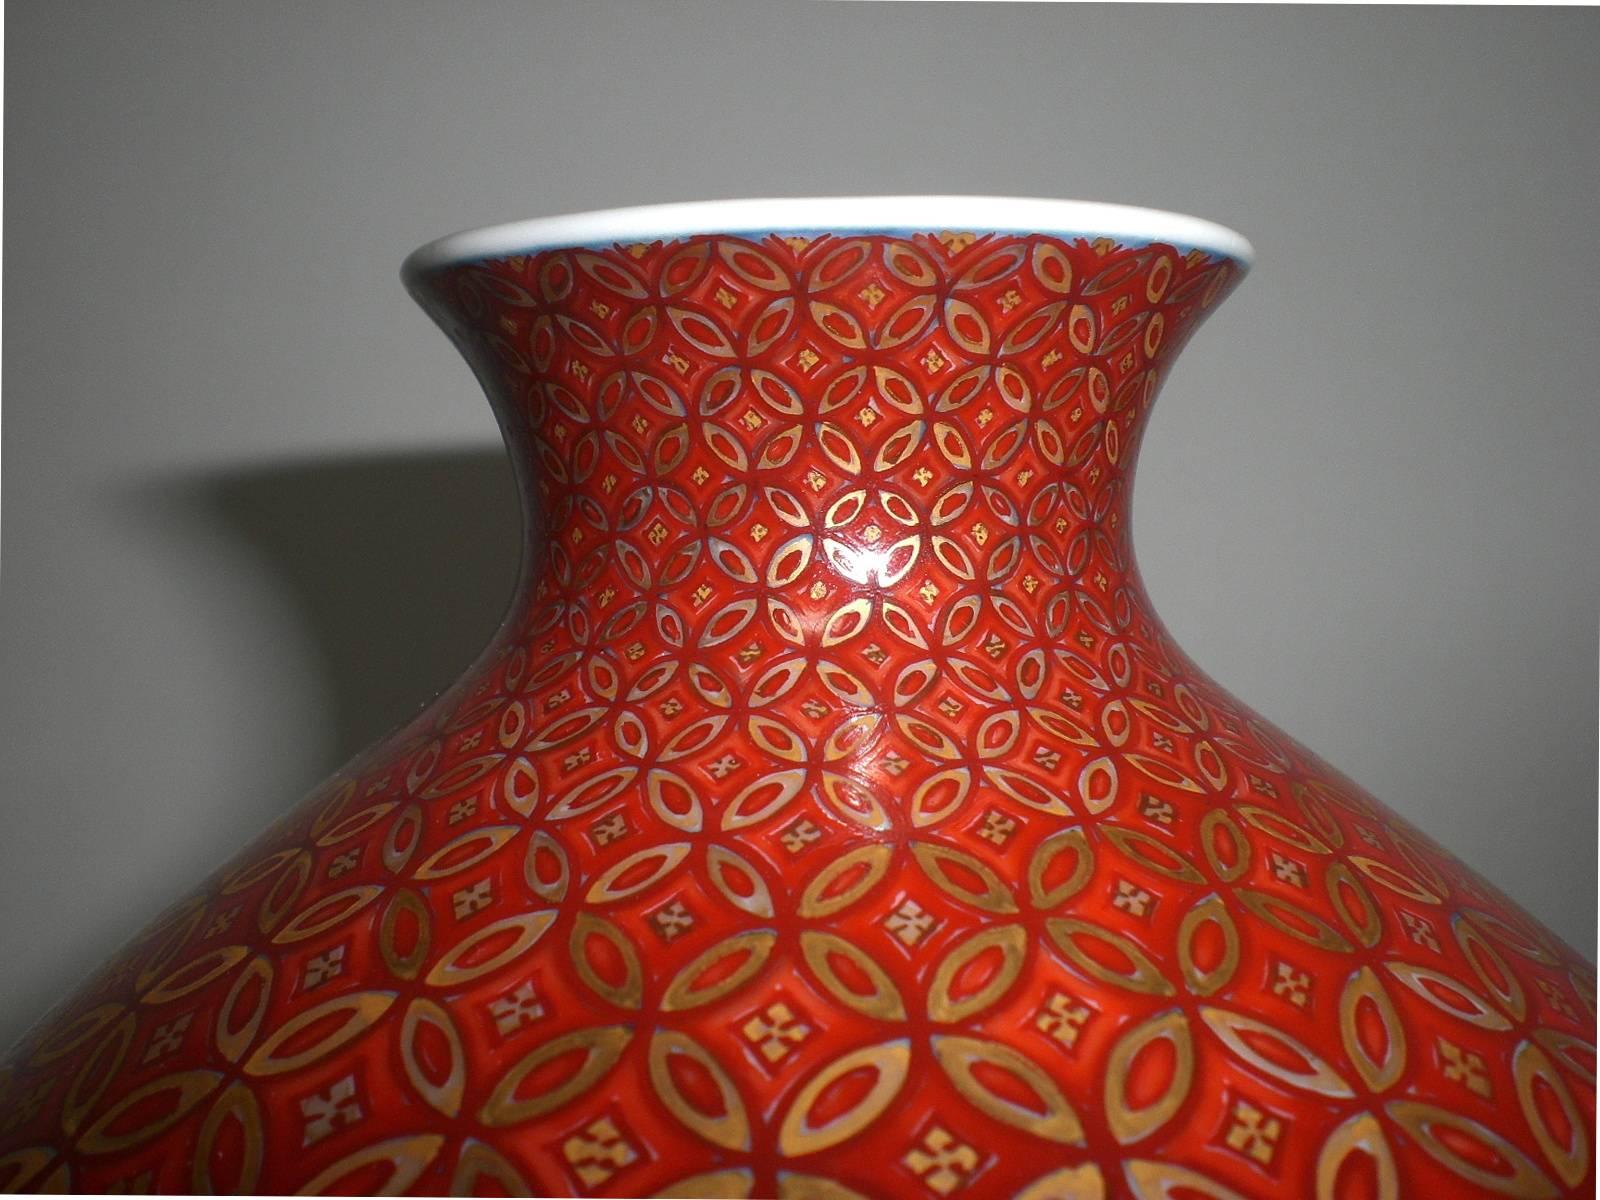 Hand-Painted Japanese Contemporary Red Gold Porcelain Vase by Master Artist